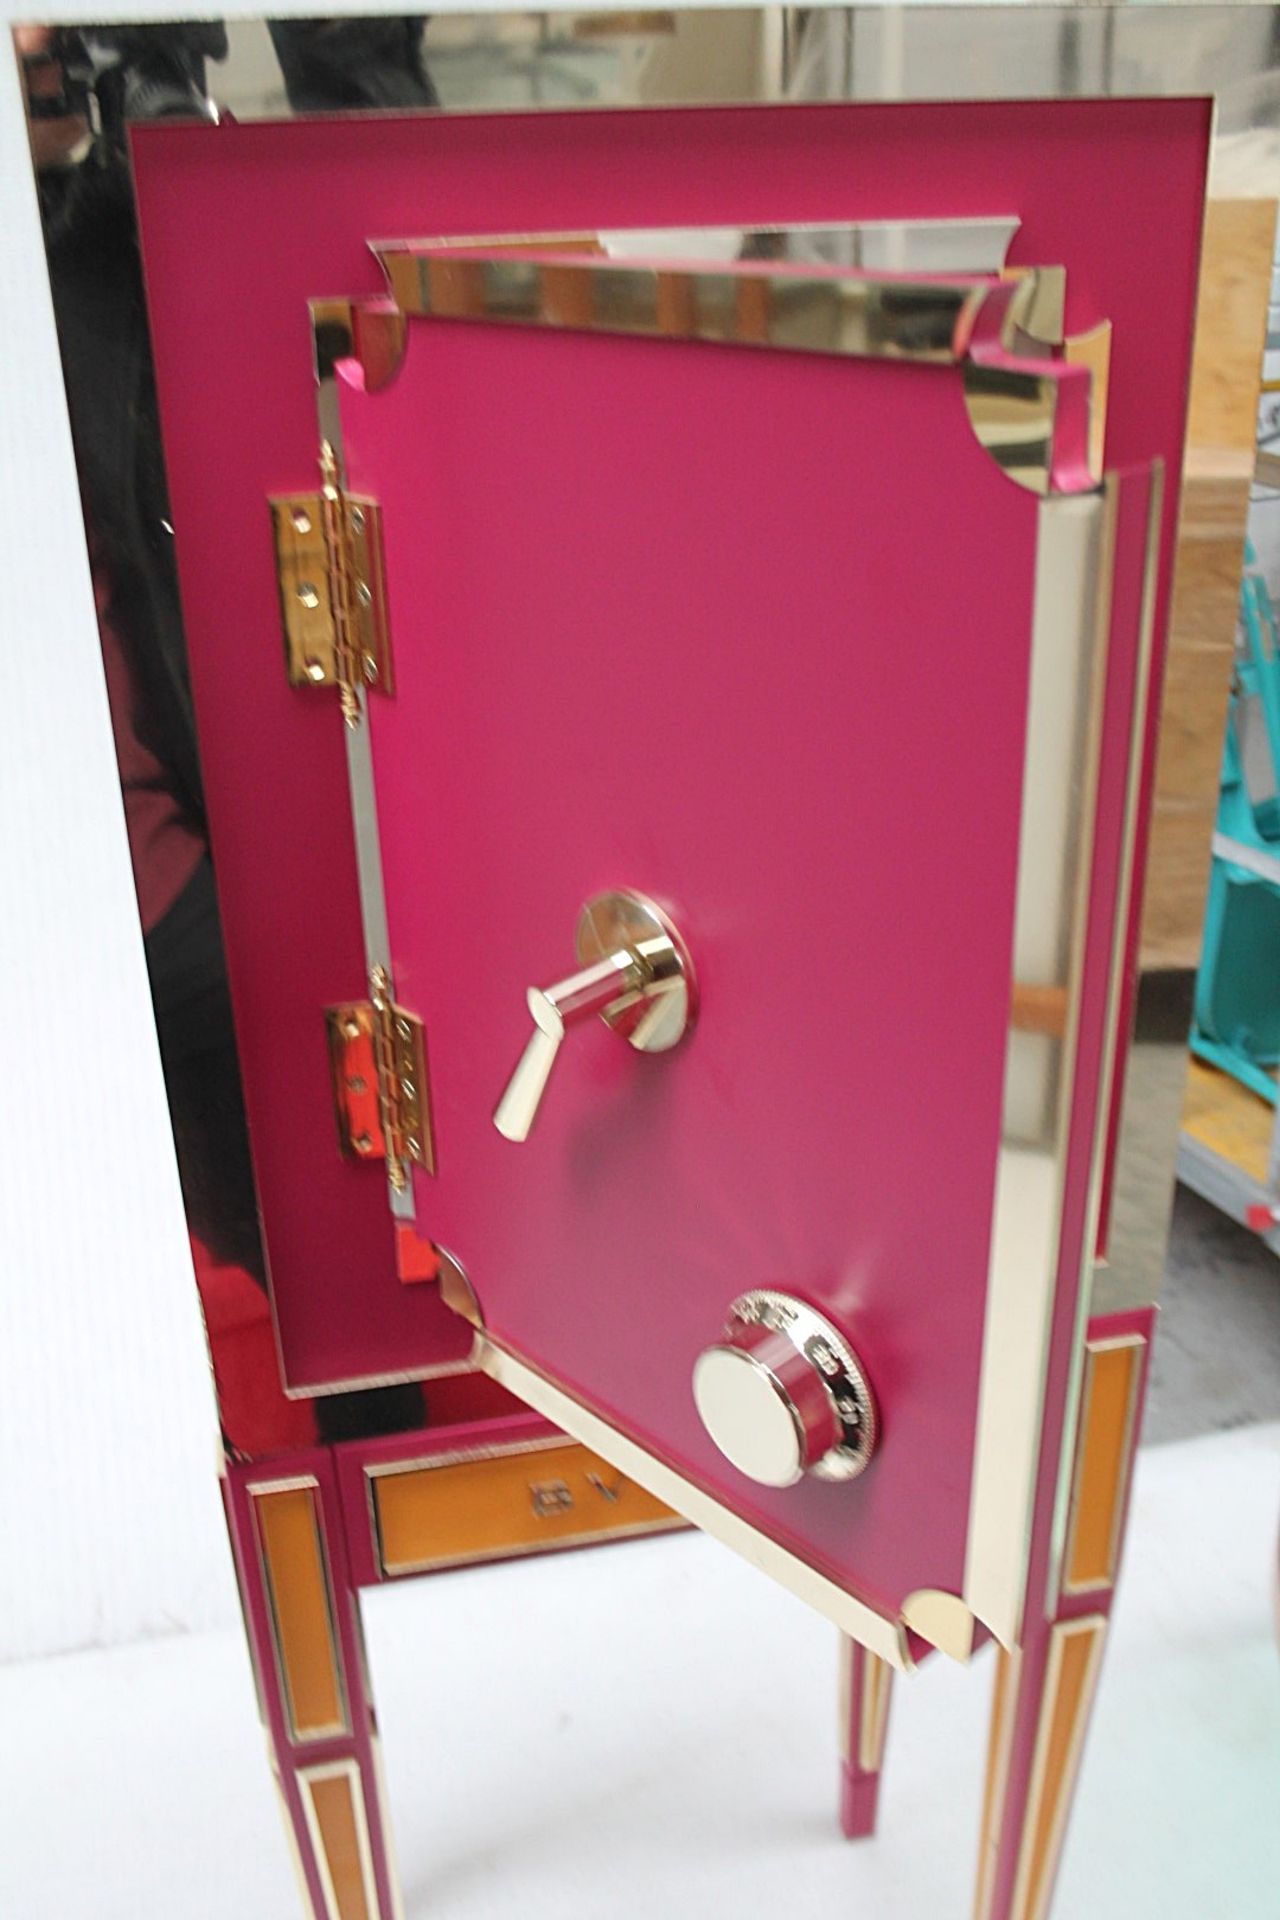 2 x Specially Commissioned Bank Vault Safe-style Illuminated Shop Display Dummy Props - Image 6 of 17